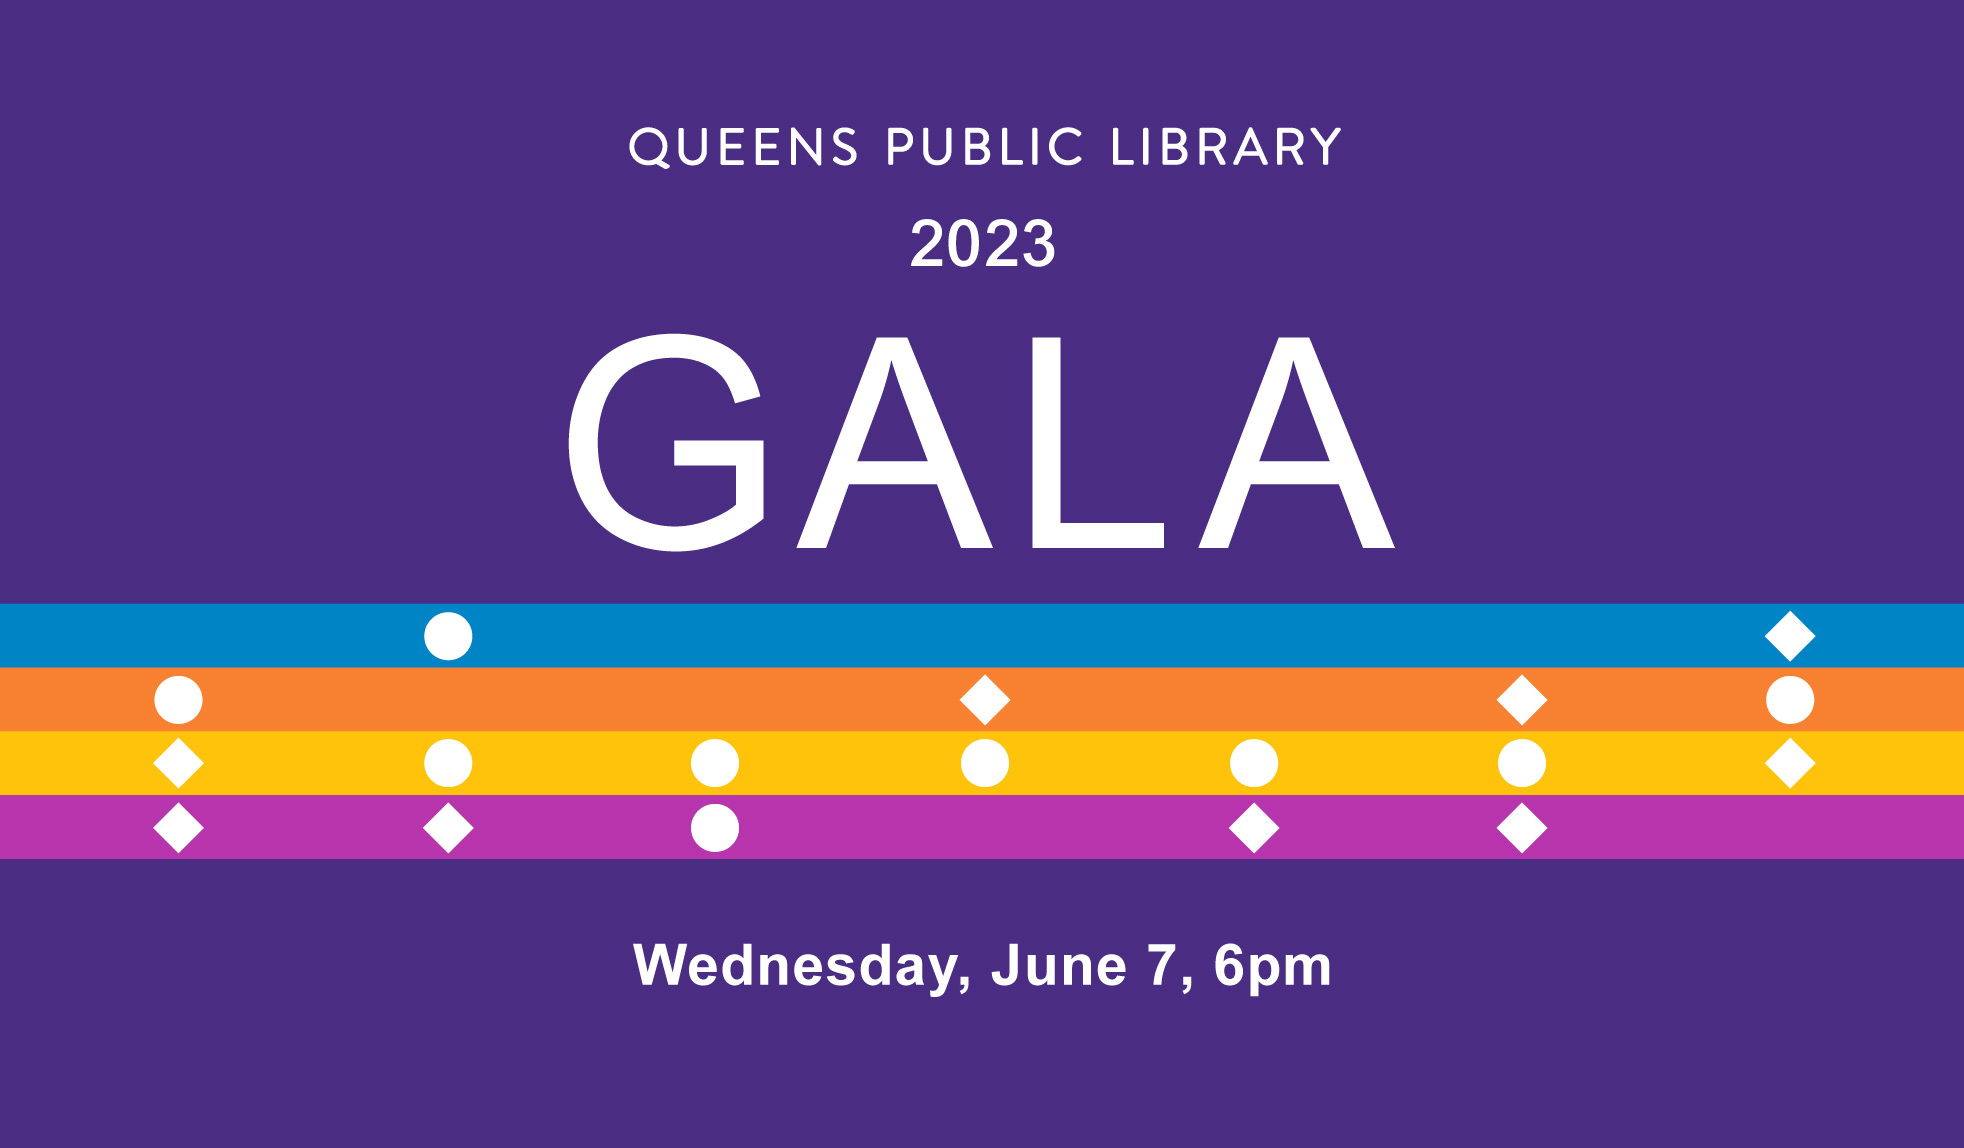 Join us as we honor our special guests: Brian Lehrer, Sigrid Nunez and Jacqueline Woodson!